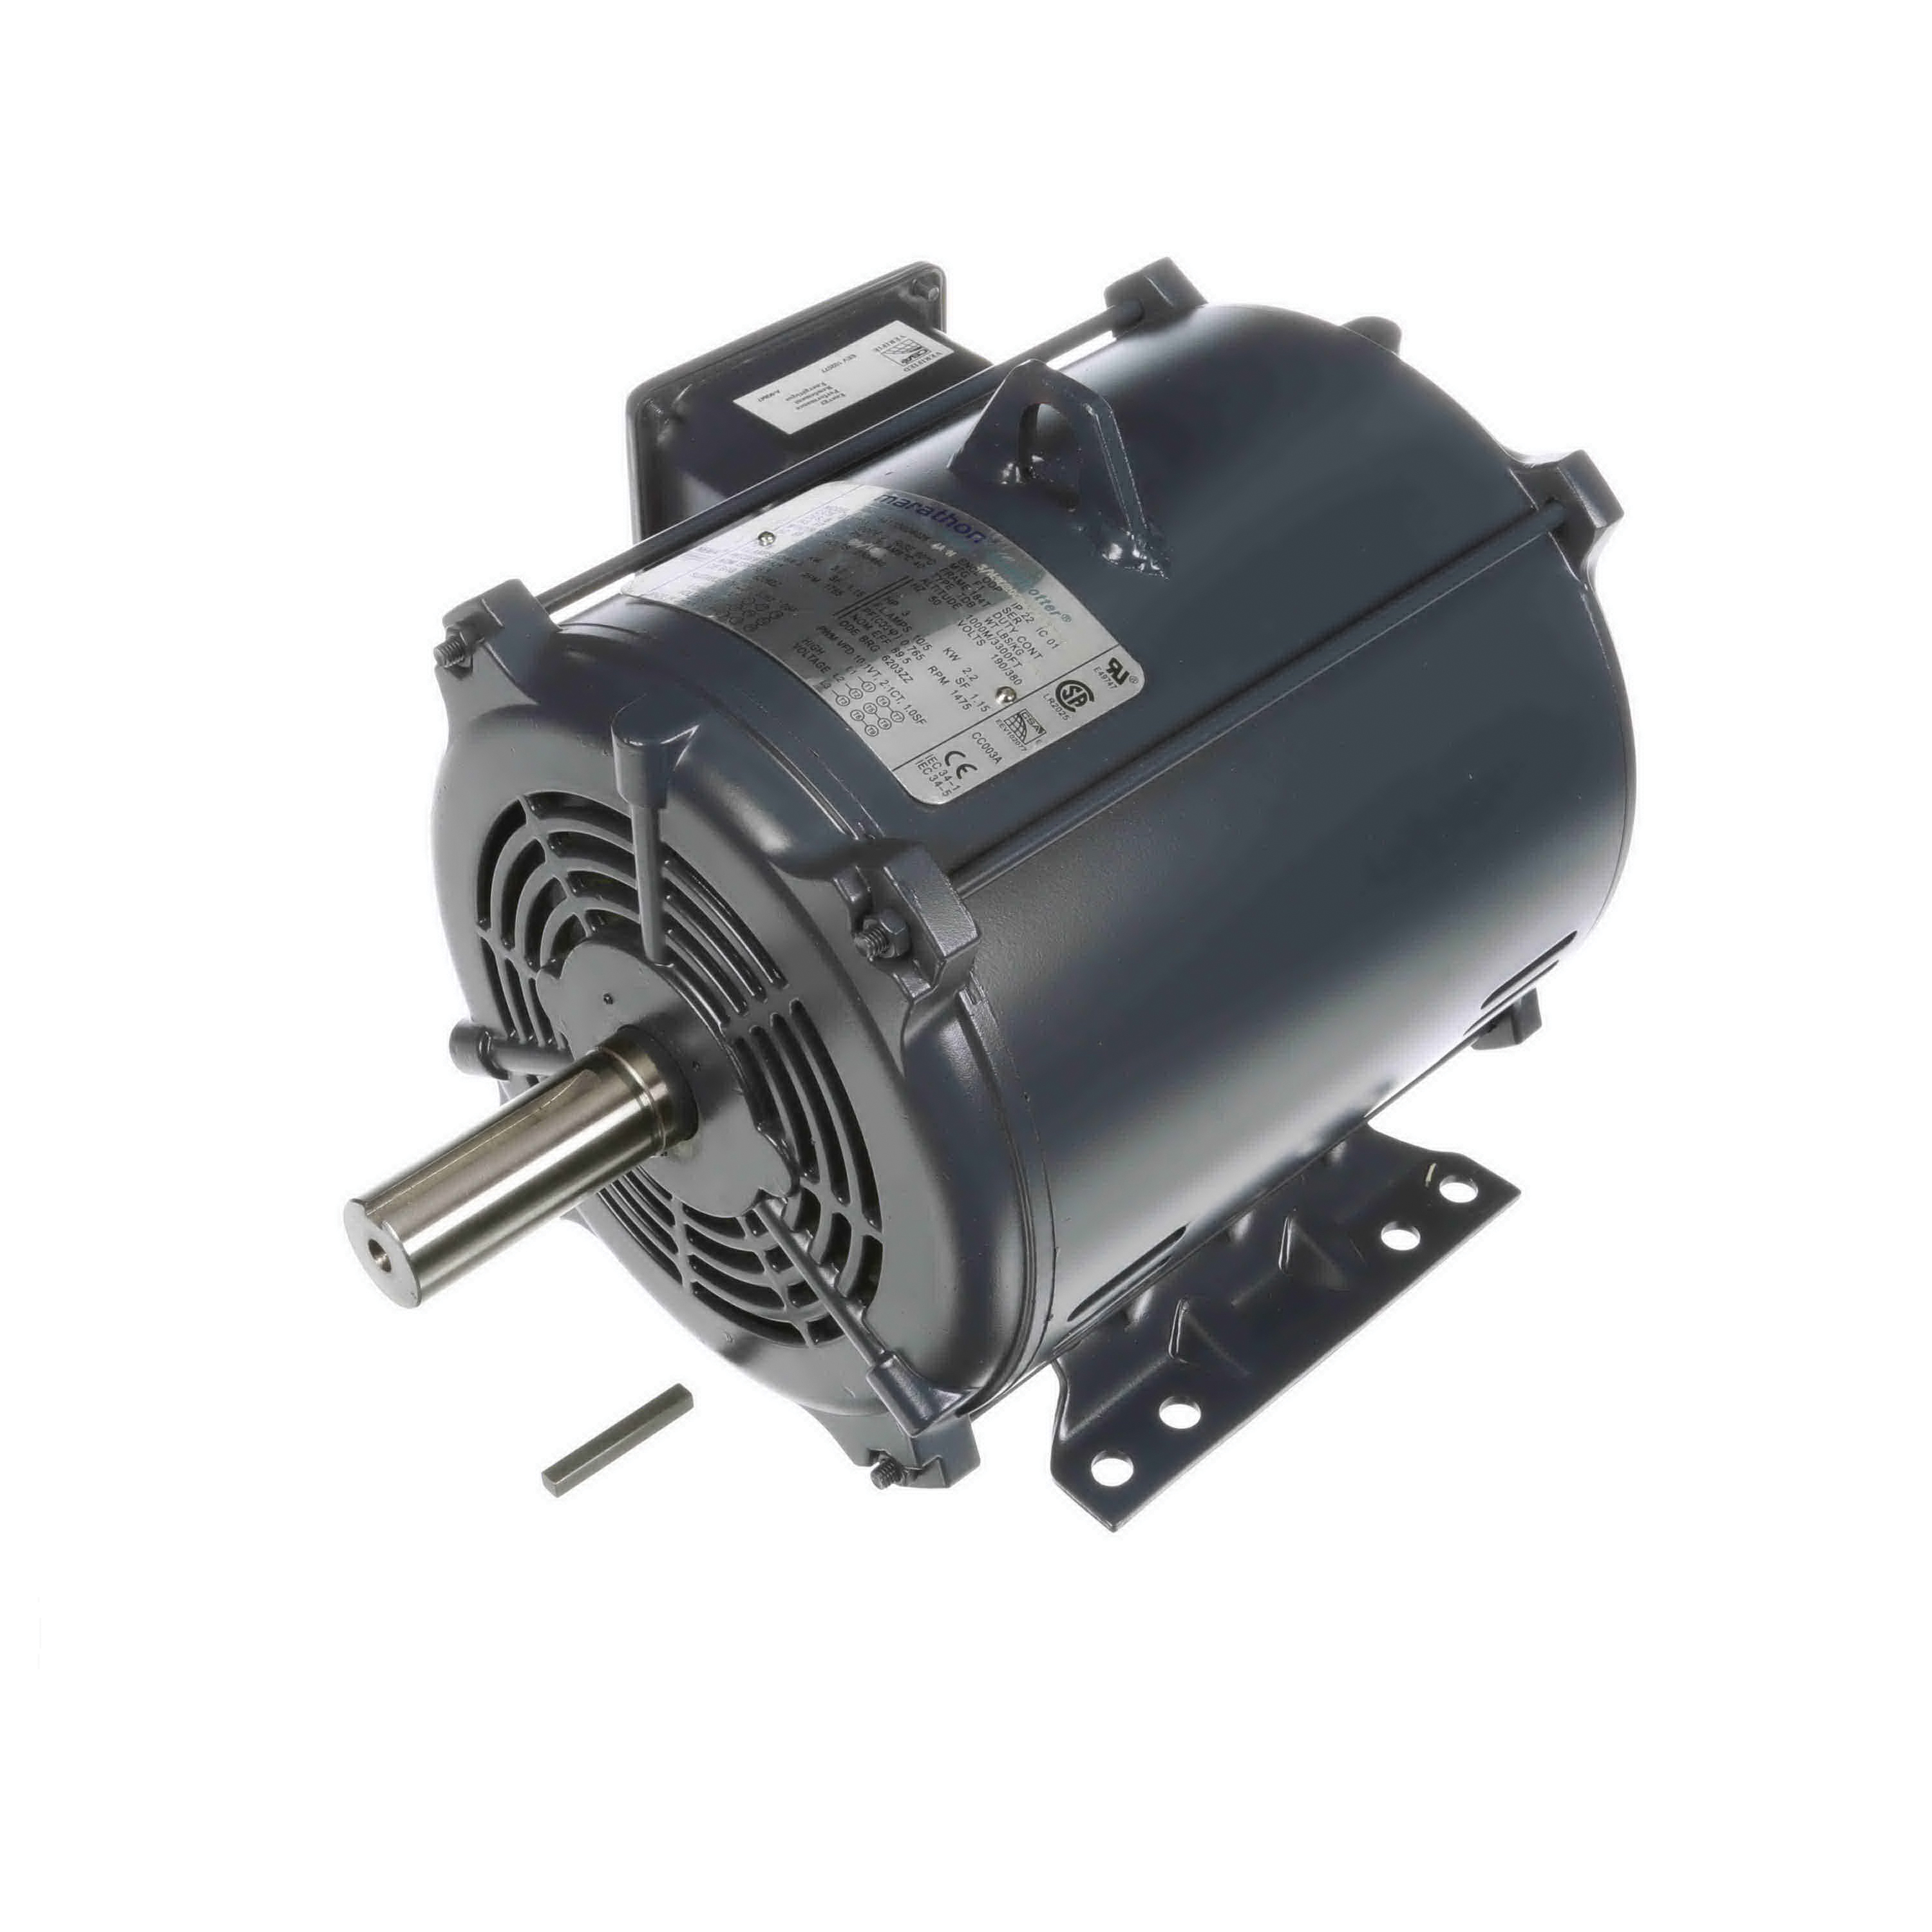 Marathon® Globetrotter® GT0013A General Purpose Motor, 208 to 230/460 V, 6.6/13.2 to 14 A, 3.7 kW, 5 hp, 60 Hz